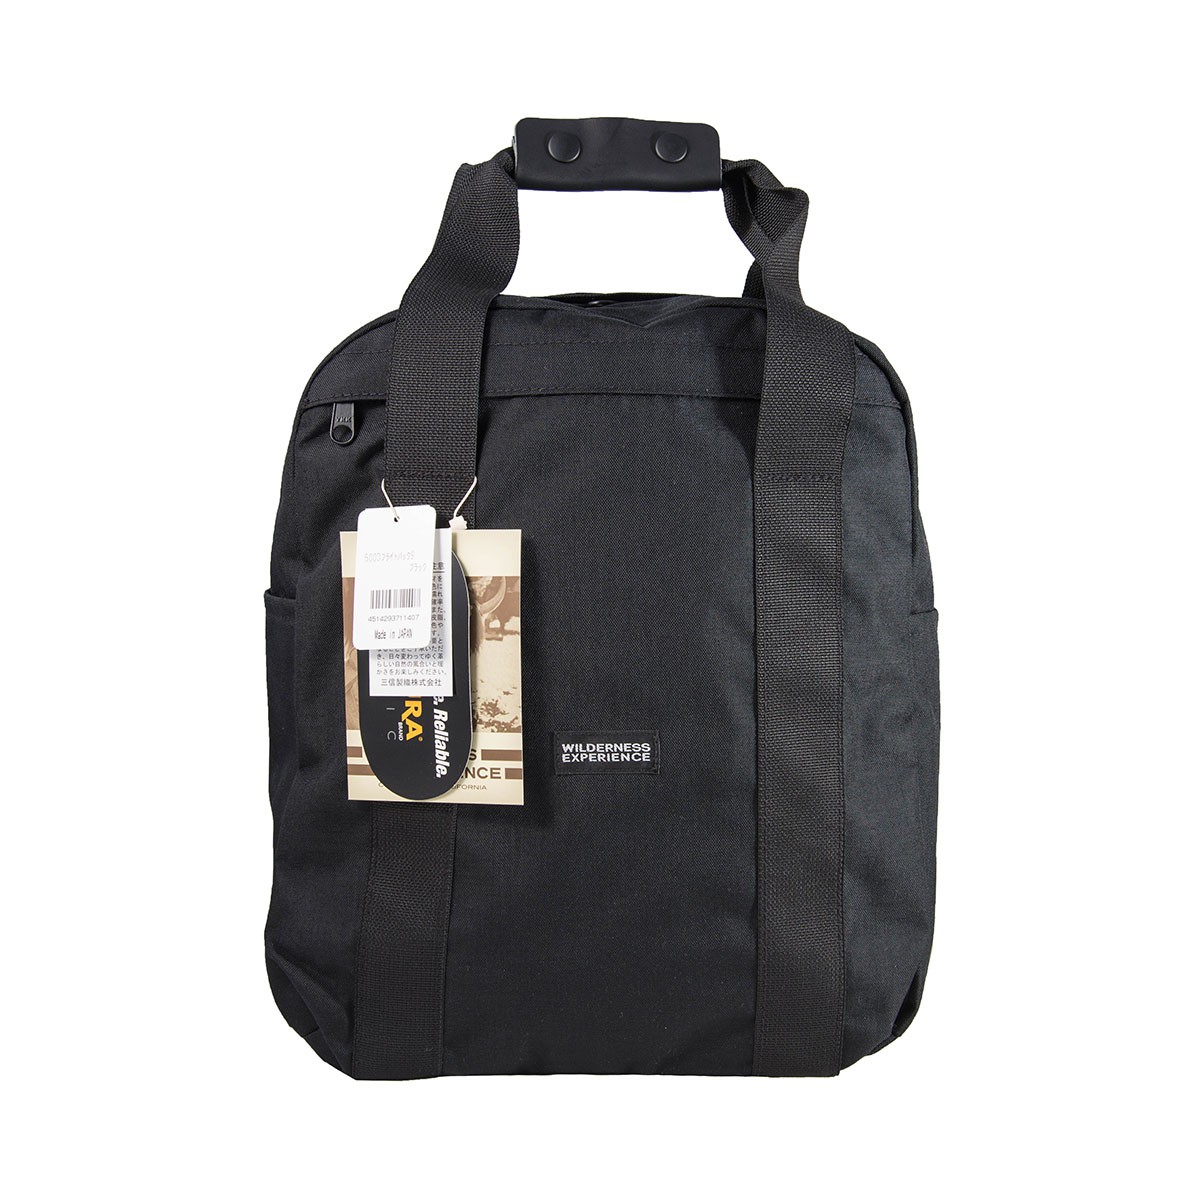 Wilderness Experience Flight Pack S Backpack Black 小型背包 <旺角店>